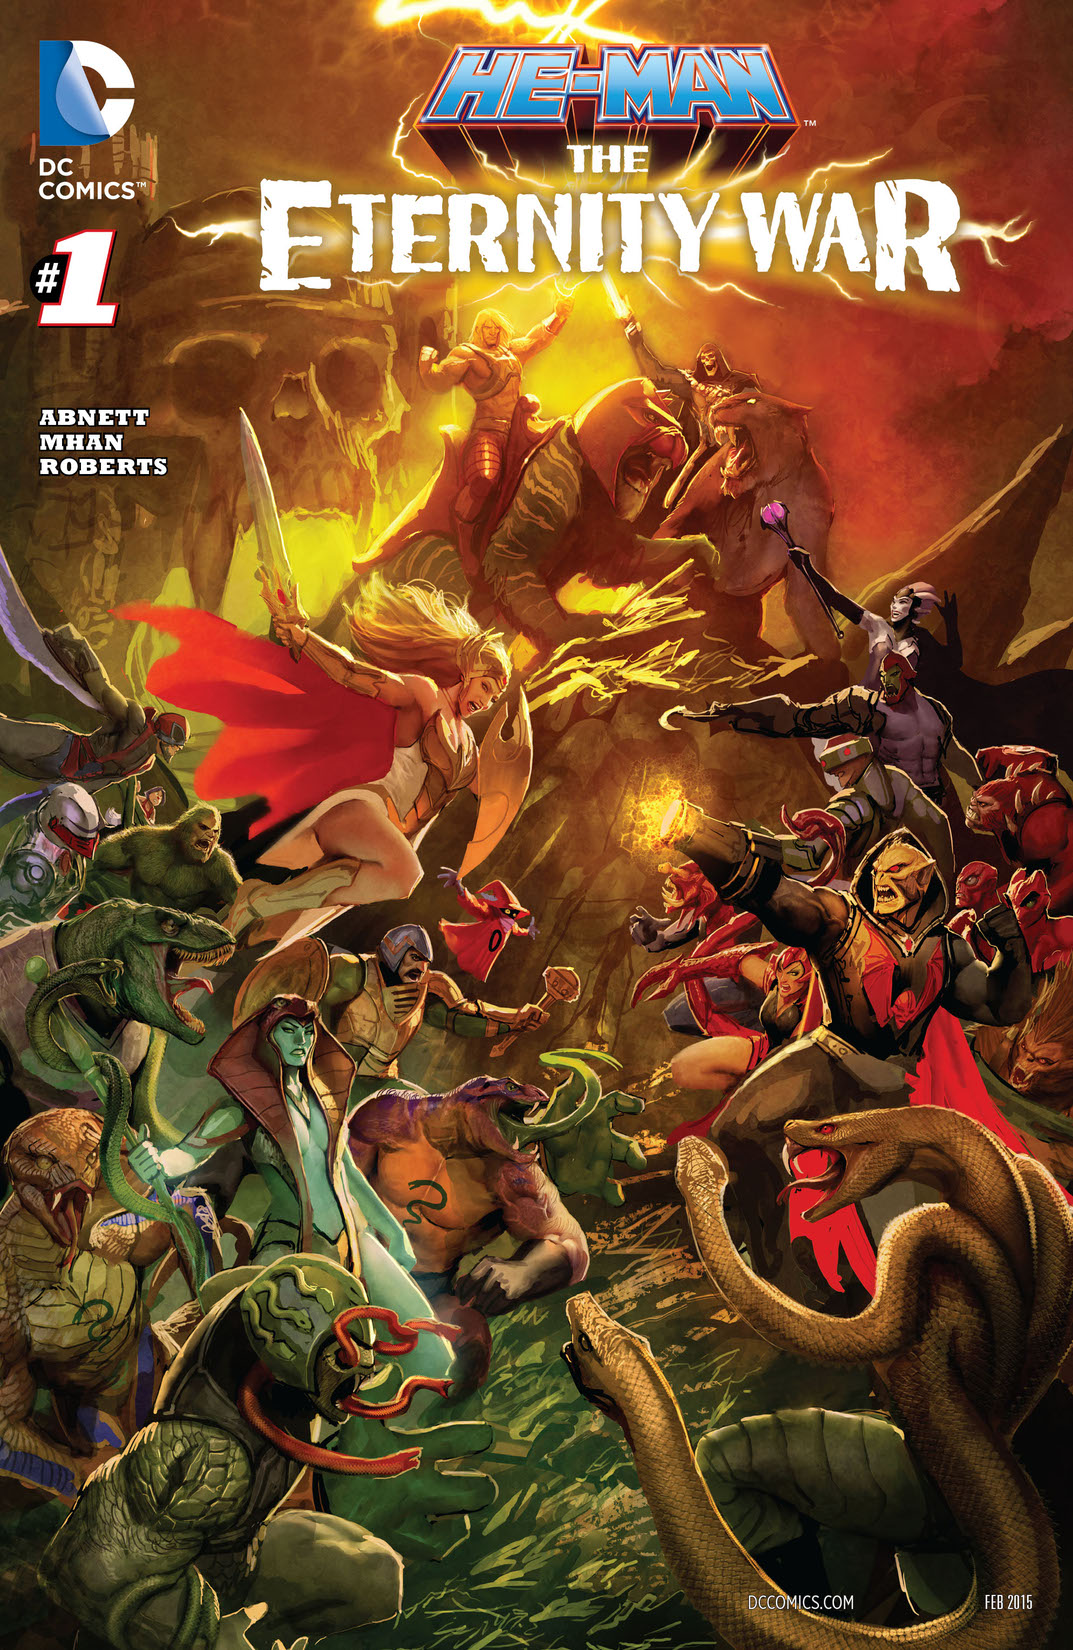 He-Man: The Eternity War #1 preview images